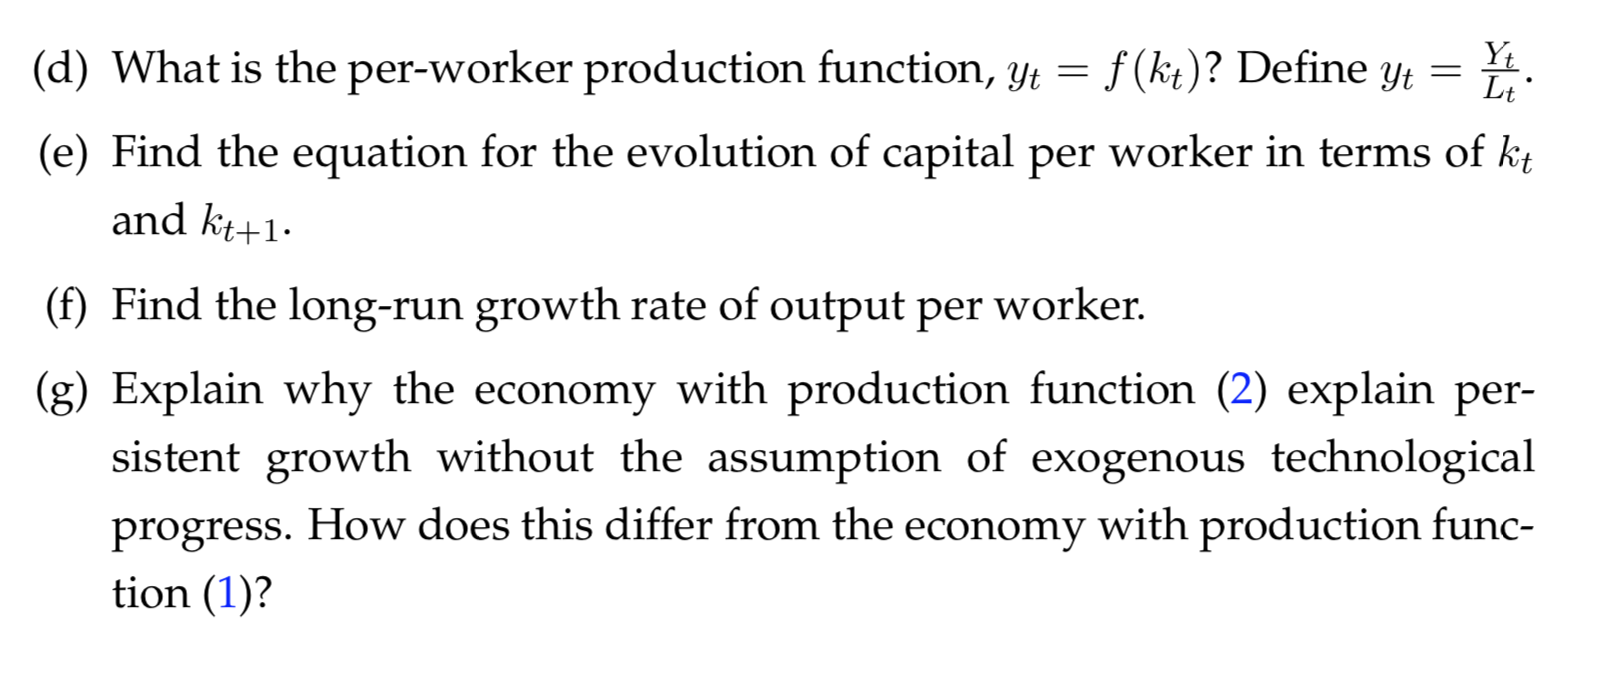 Yt
Lt
f (kt)? Define yt
(d) What is the per-worker production function, yt
(e) Find the equation for the evolution of capital per worker in terms of kt
and kt+1
(f) Find the long-run growth rate of output per worker.
(g) Explain why the economy with production function (2) explain per-
sistent growth without the assumption of exogenous technological
progress. How does this differ from the economy with production func-
tion (1)?
